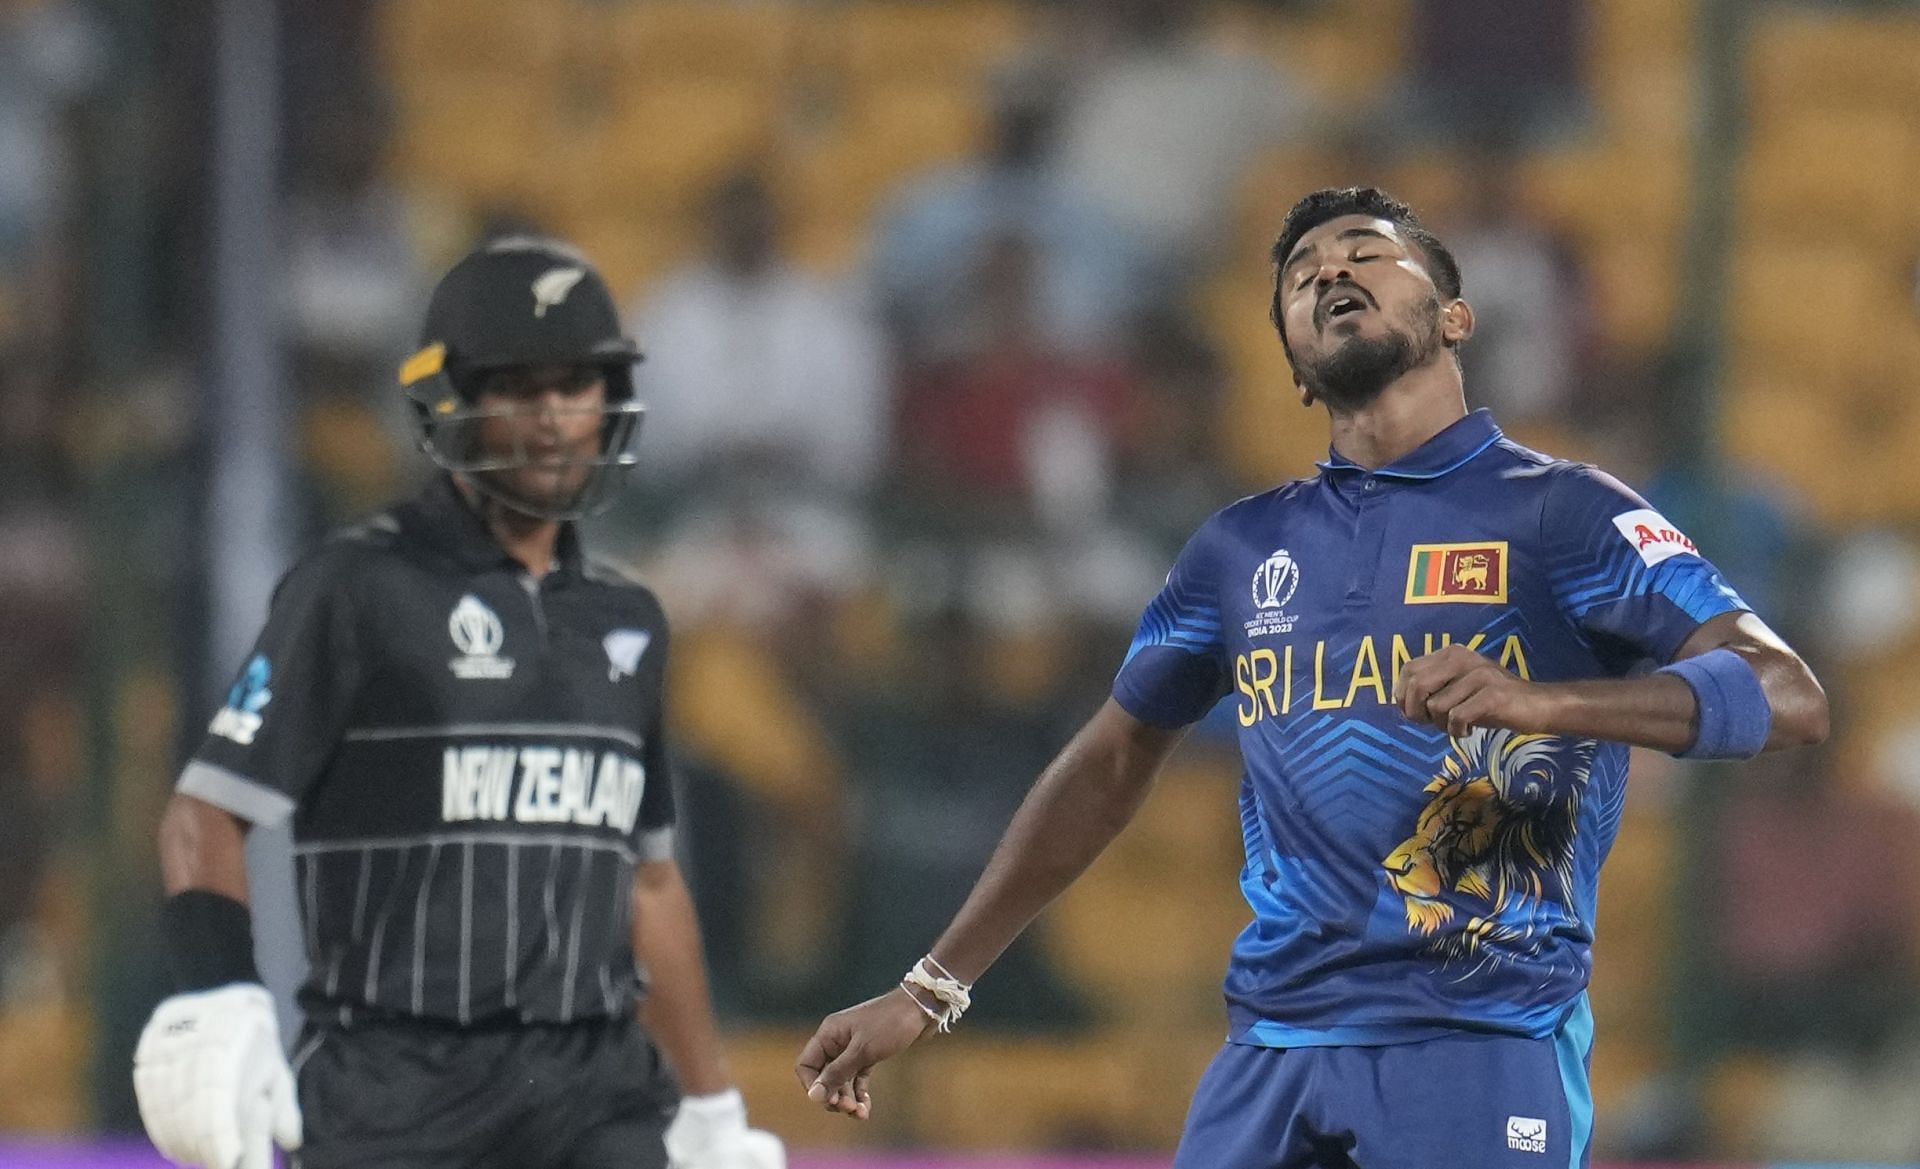 Dilshan Madushanka has been a standout performer in the 2023 World Cup